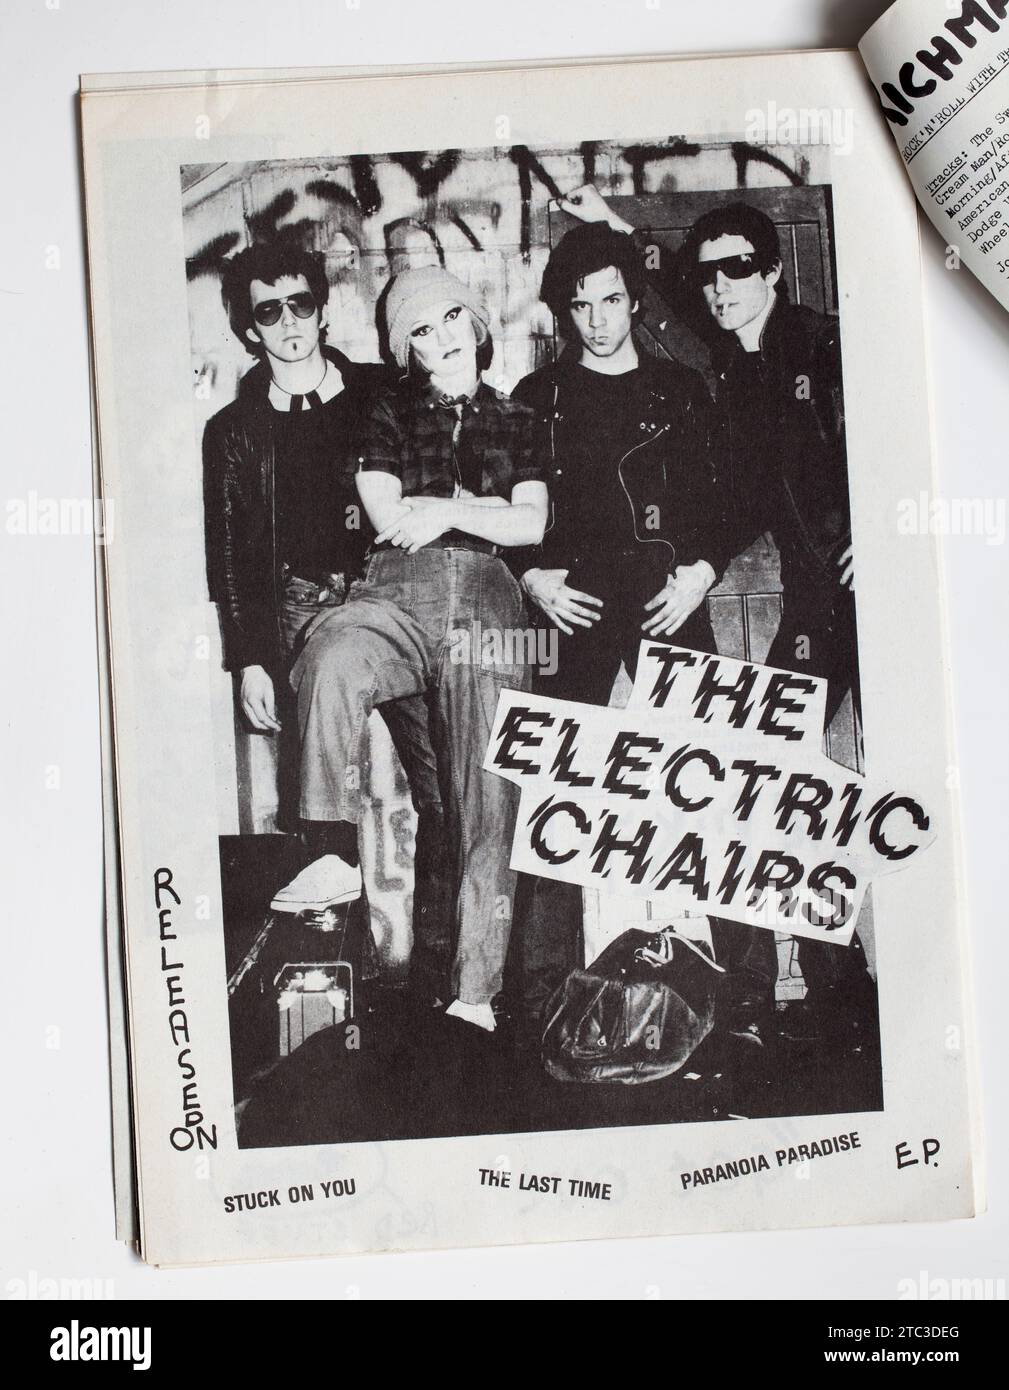 Advert for The Electric Chairs in issue No 11 in 1970s Sniffin Glue Punk Rock Fanzine Magazine Stock Photo